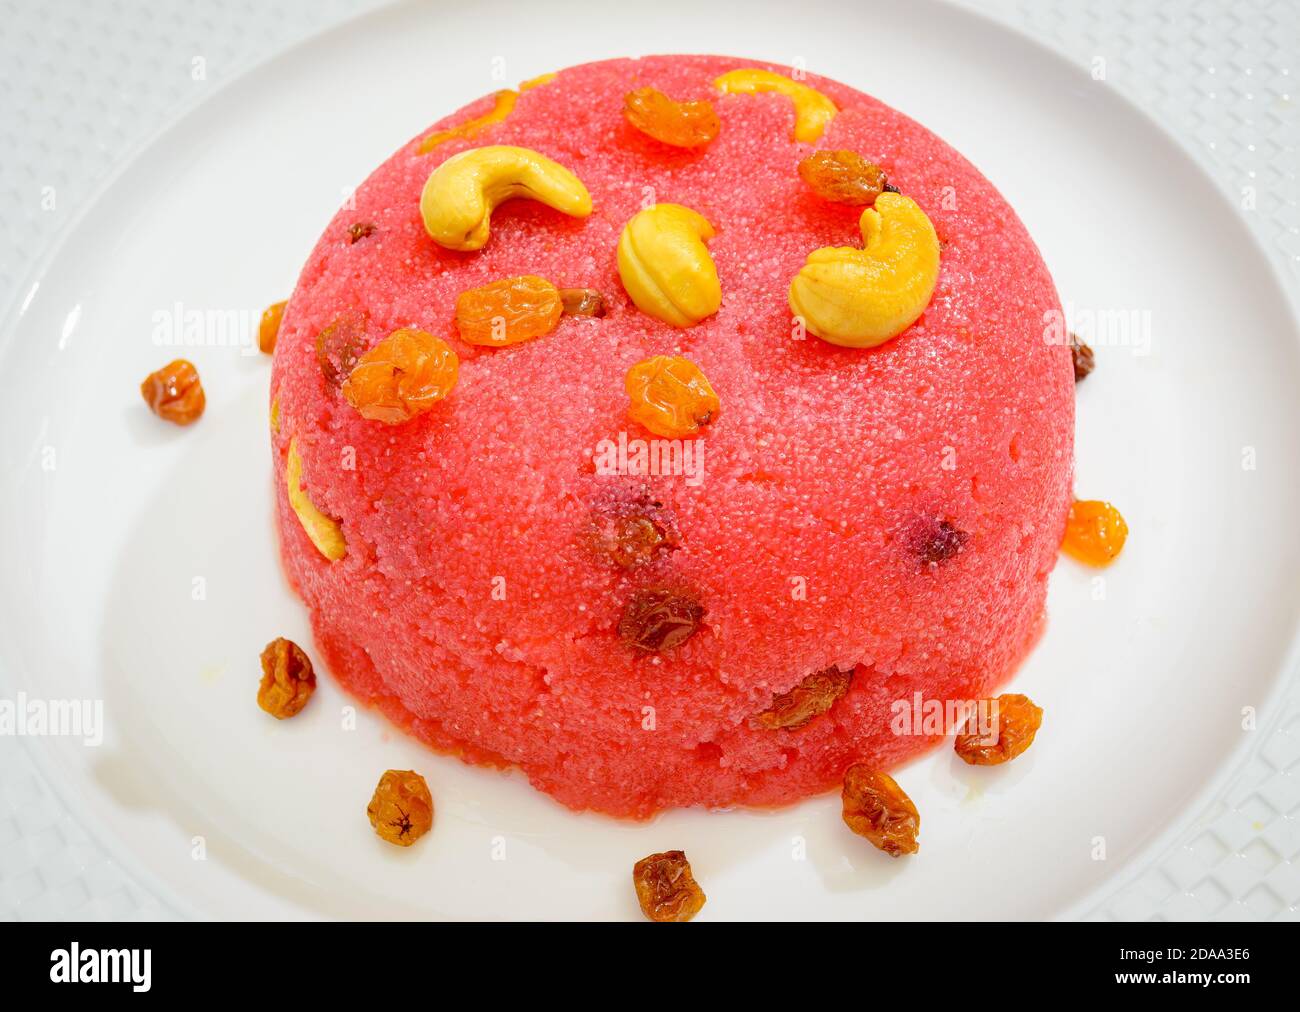 Beautiful, ready-to-eat Pink Rava Kesari mound in a white plate garnished with cashew nuts & raisins Stock Photo